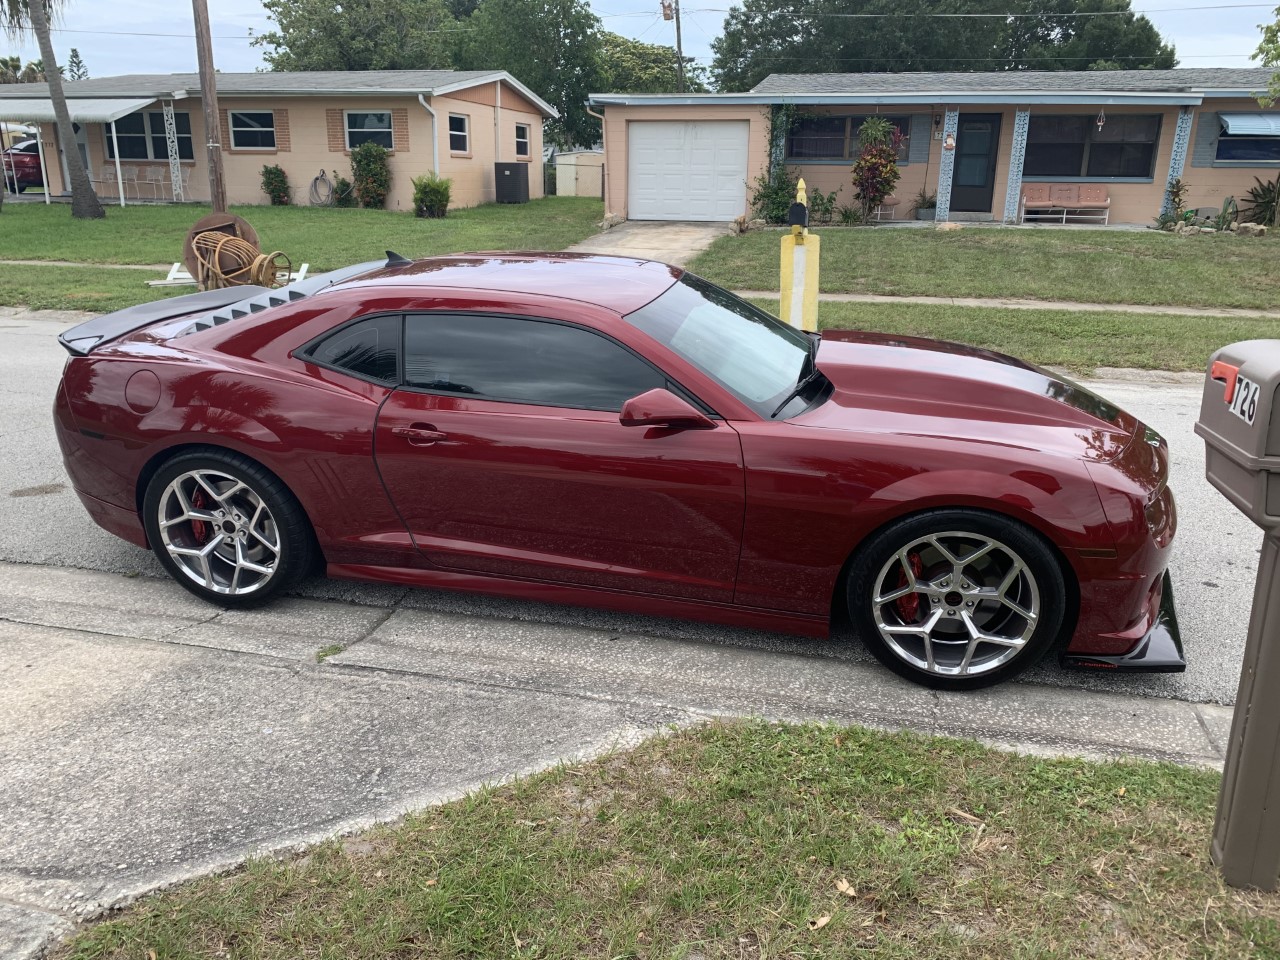 Adams wheel cleaner vs Adams tire and rubber cleaner.. what's the  difference? - Camaro5 Chevy Camaro Forum / Camaro ZL1, SS and V6 Forums 